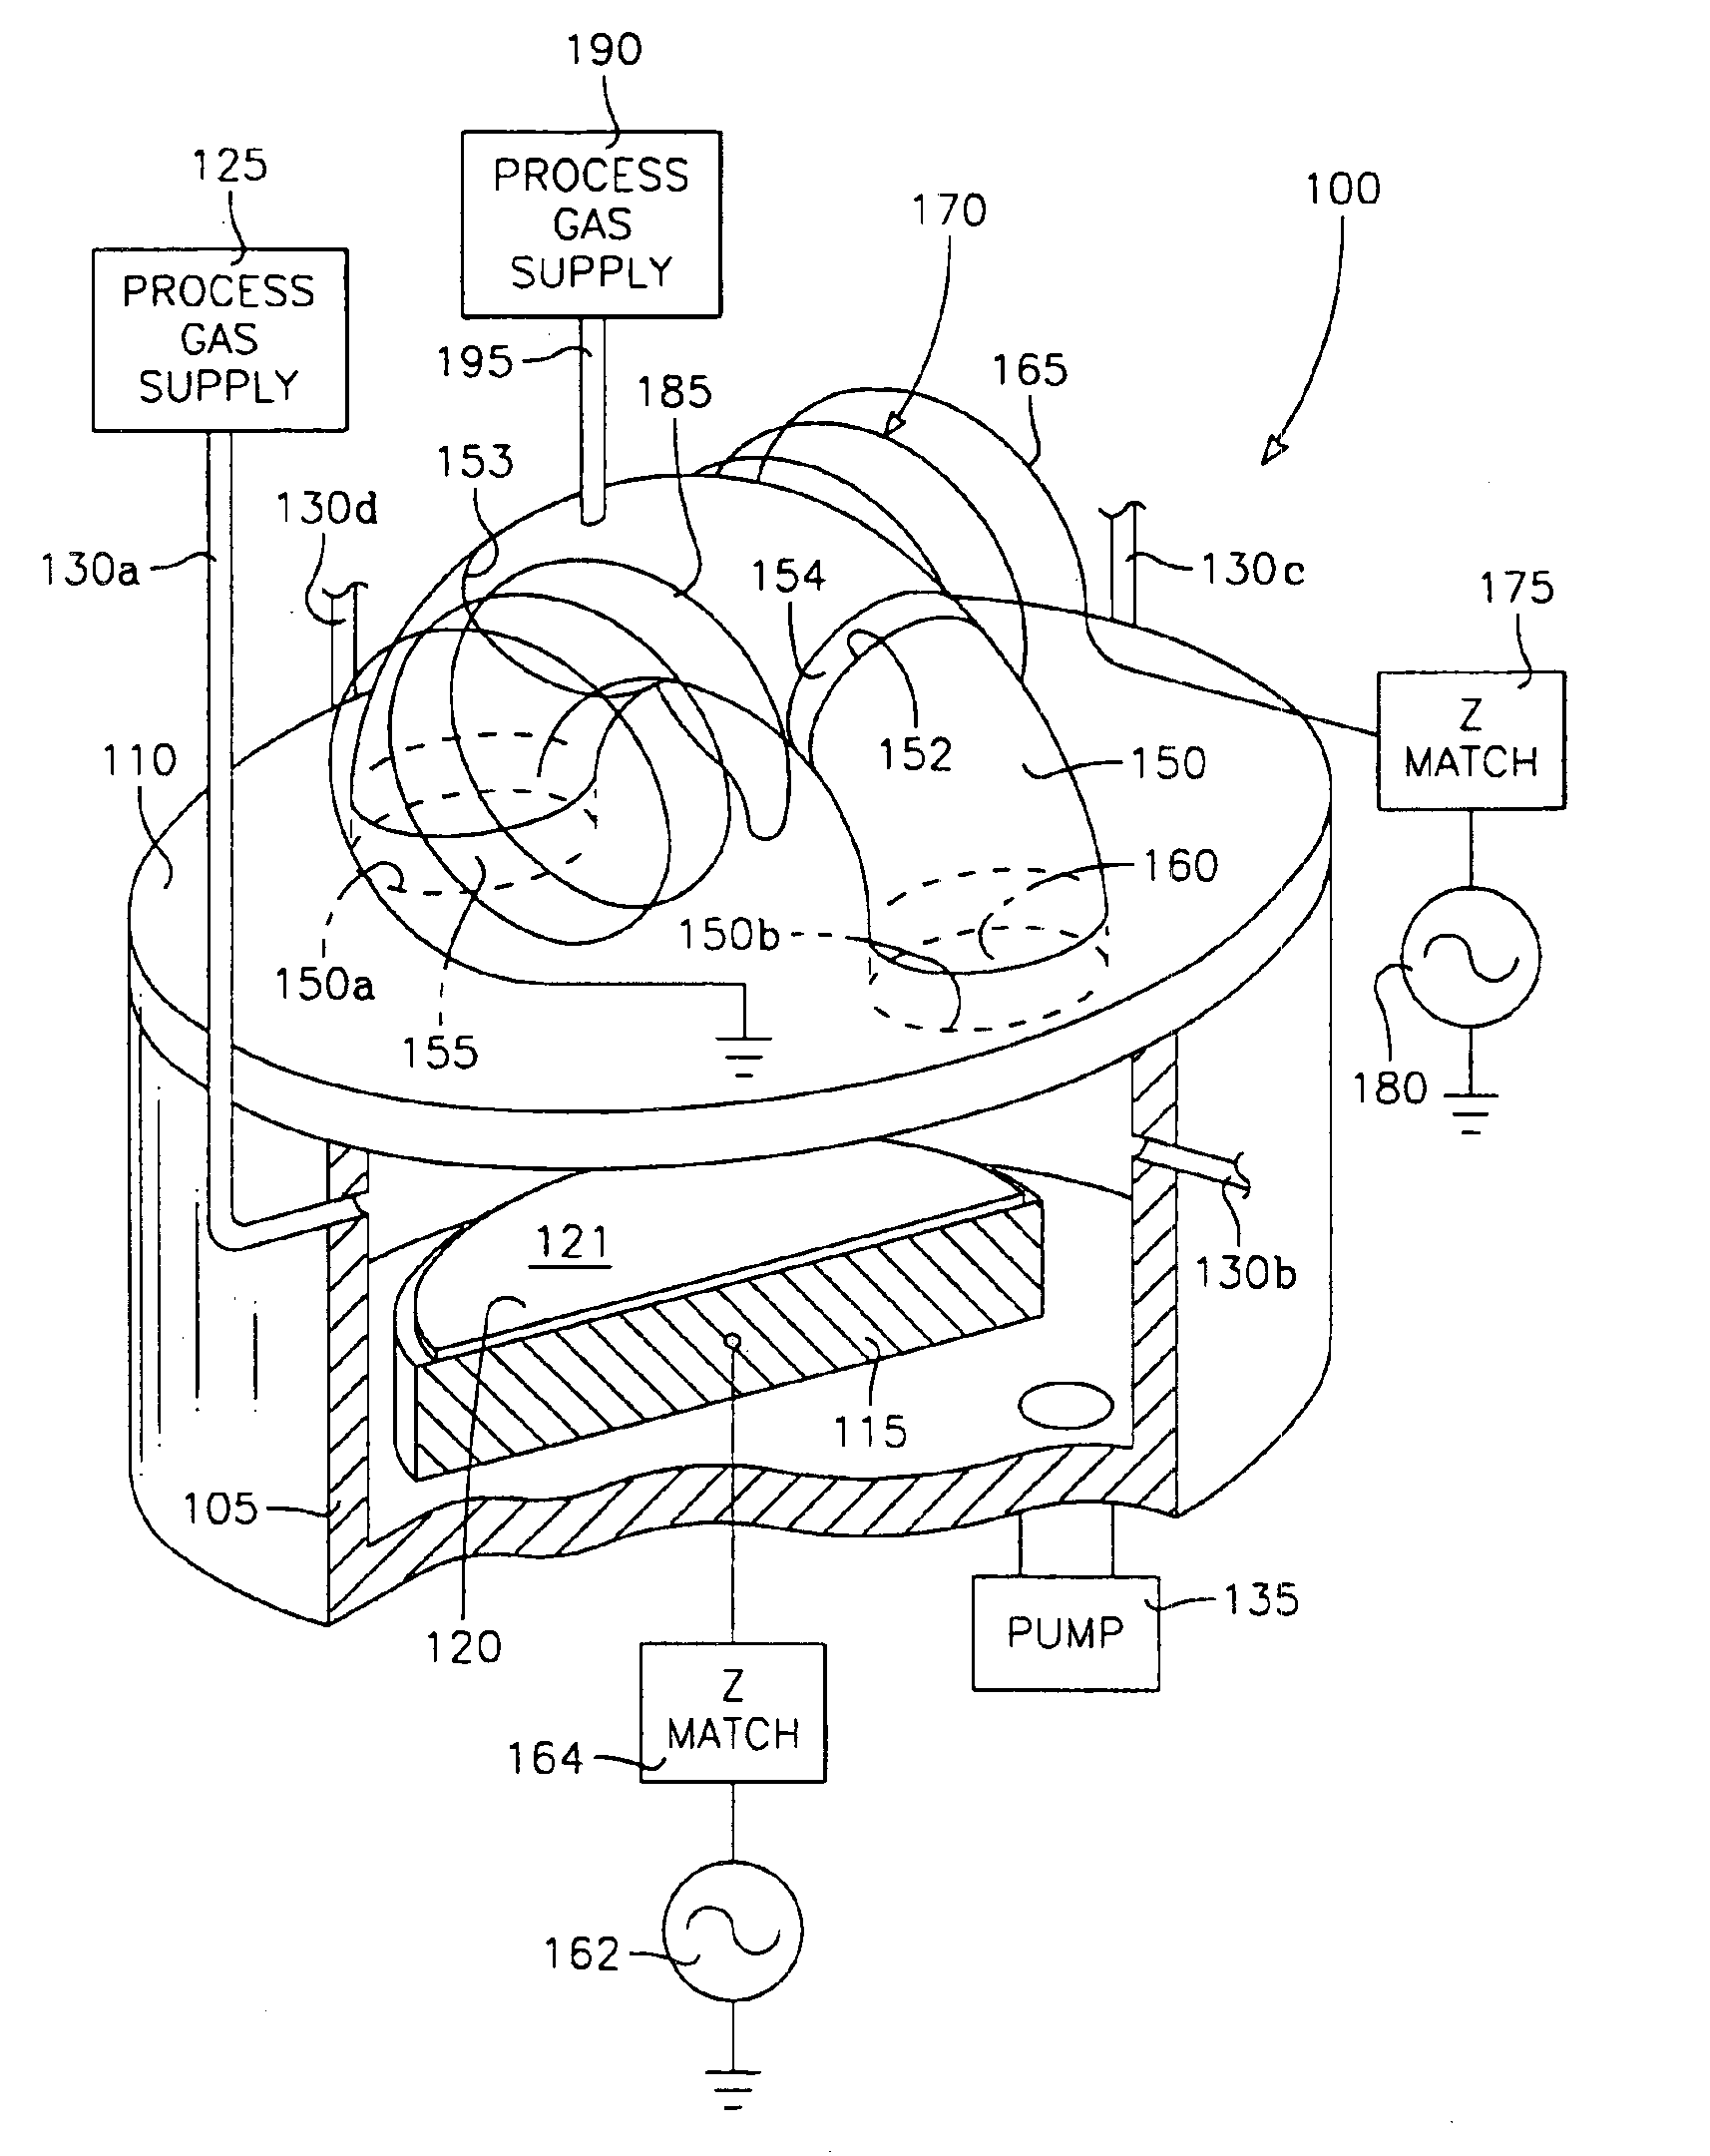 Fabrication of silicon-on-insulator structure using plasma immersion ion implantation